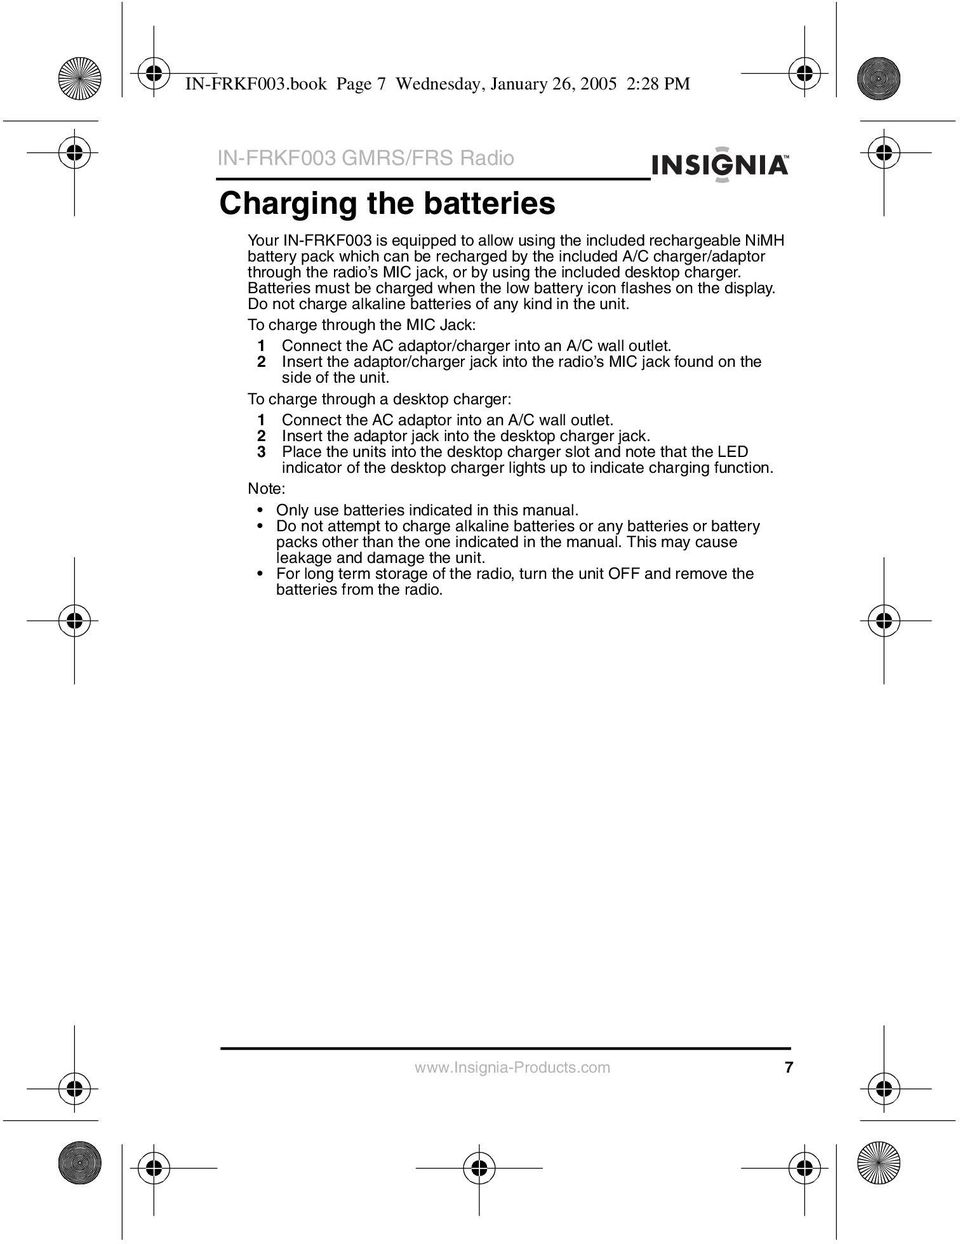 recharged by the included A/C charger/adaptor through the radio s MIC jack, or by using the included desktop charger. Batteries must be charged when the low battery icon flashes on the display.